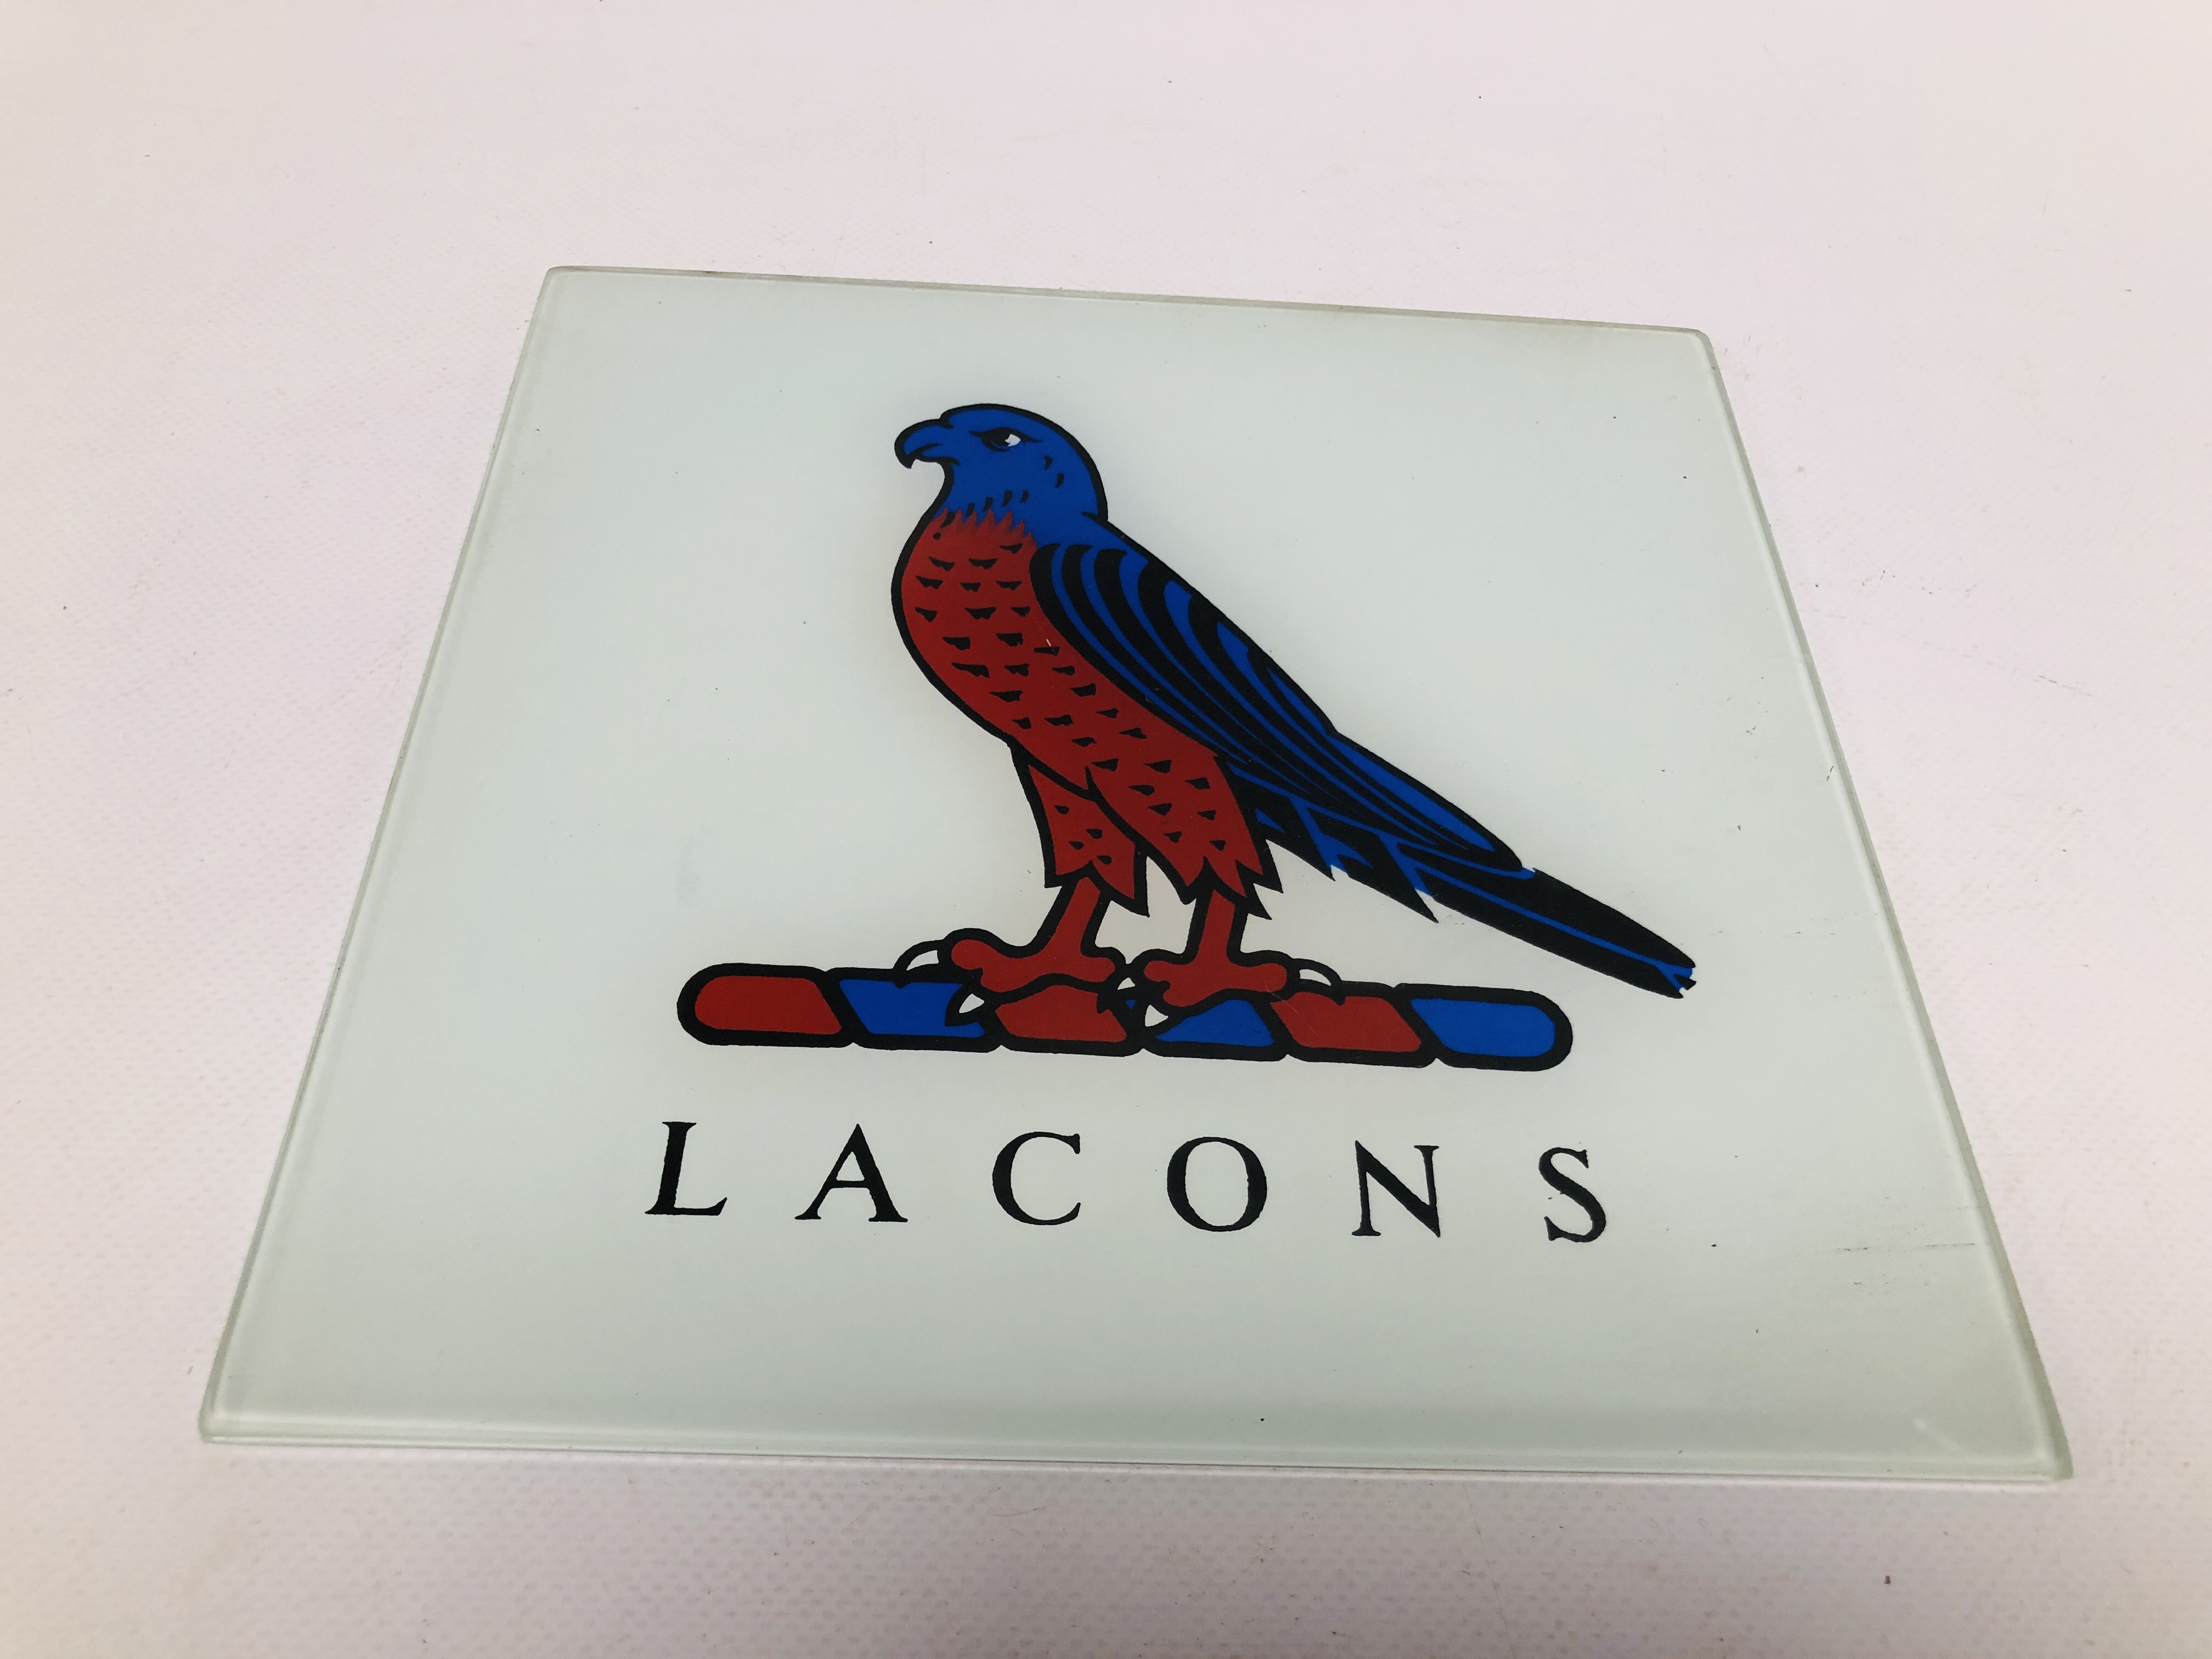 "LACONS" GREAT YARMOUTH GLASS BREWERY ADVERTISING SIGN HEIGHT 23CM. WIDTH 23CM.